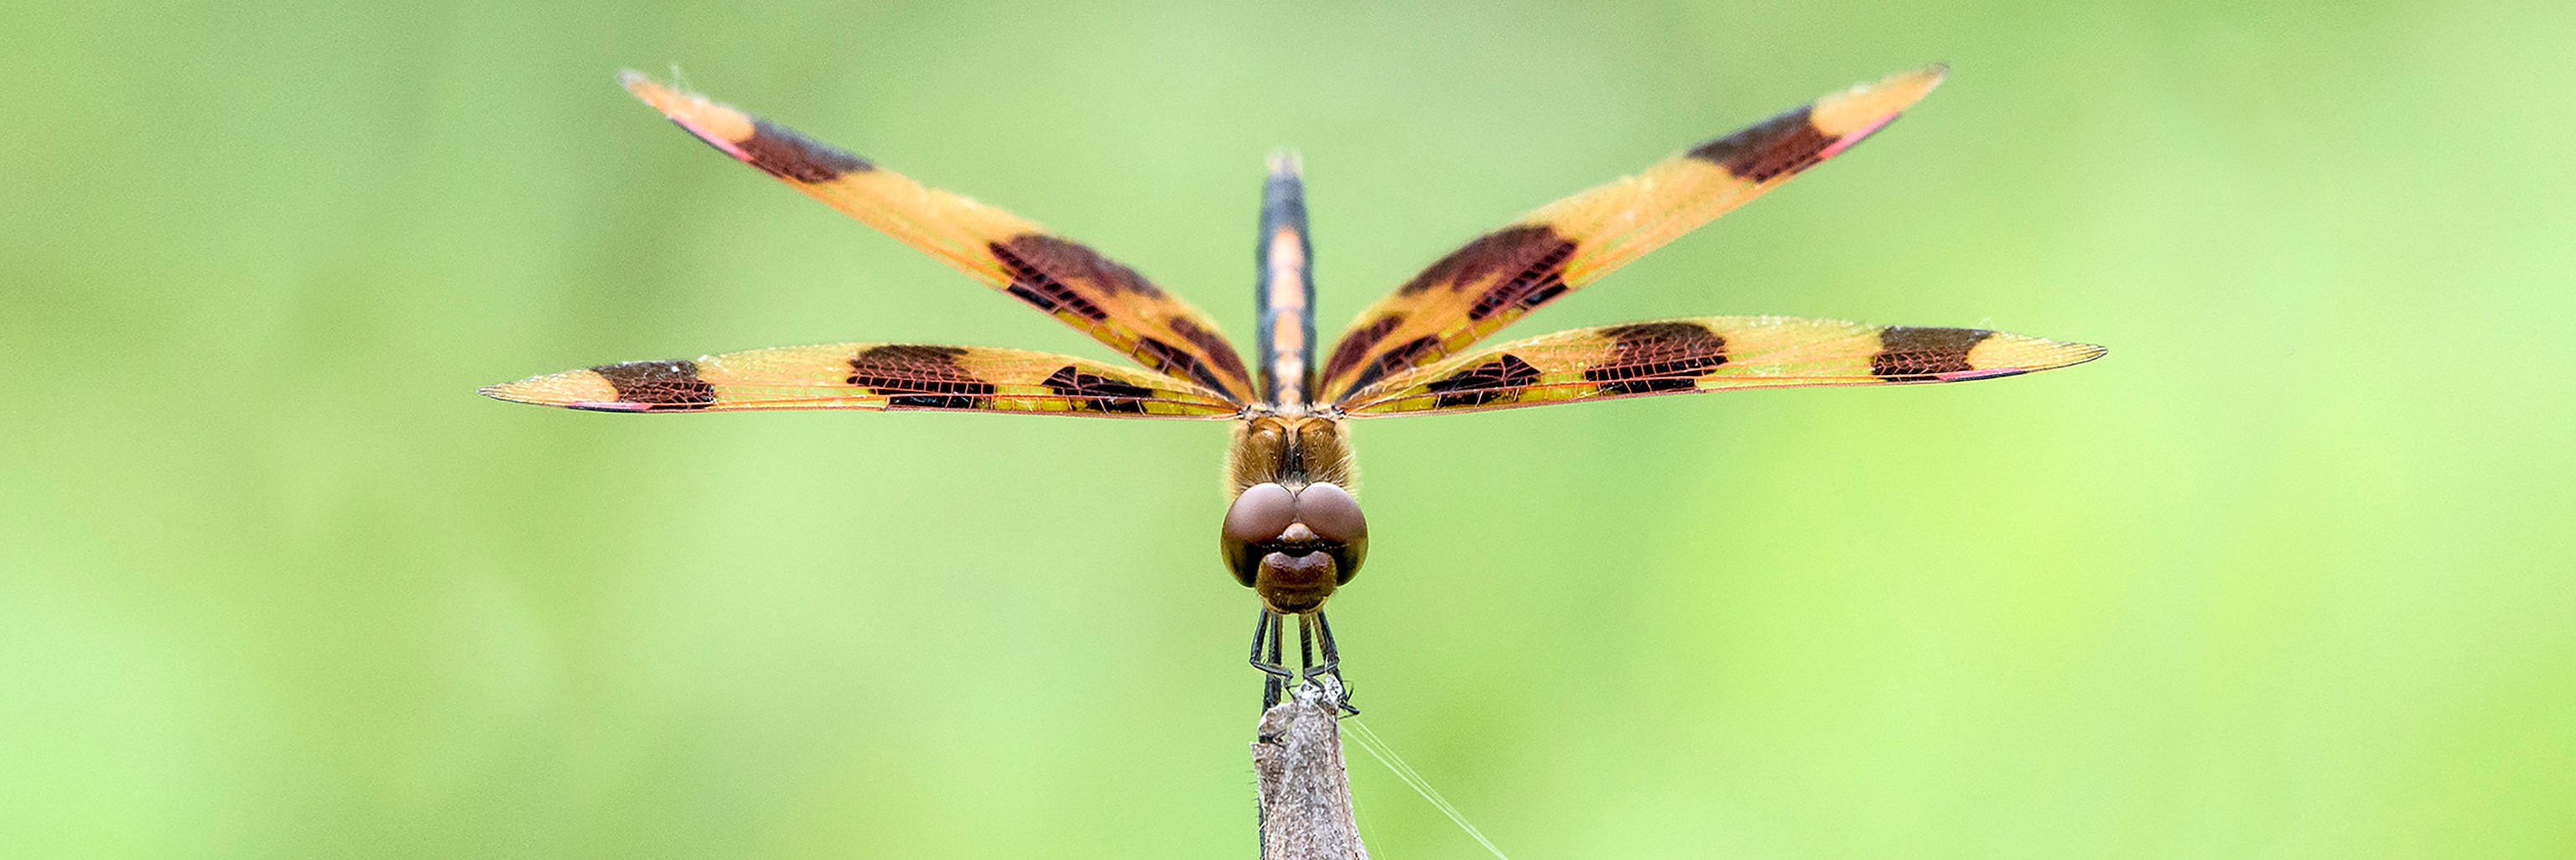 A picture of a dragonfly landing on a leaf.